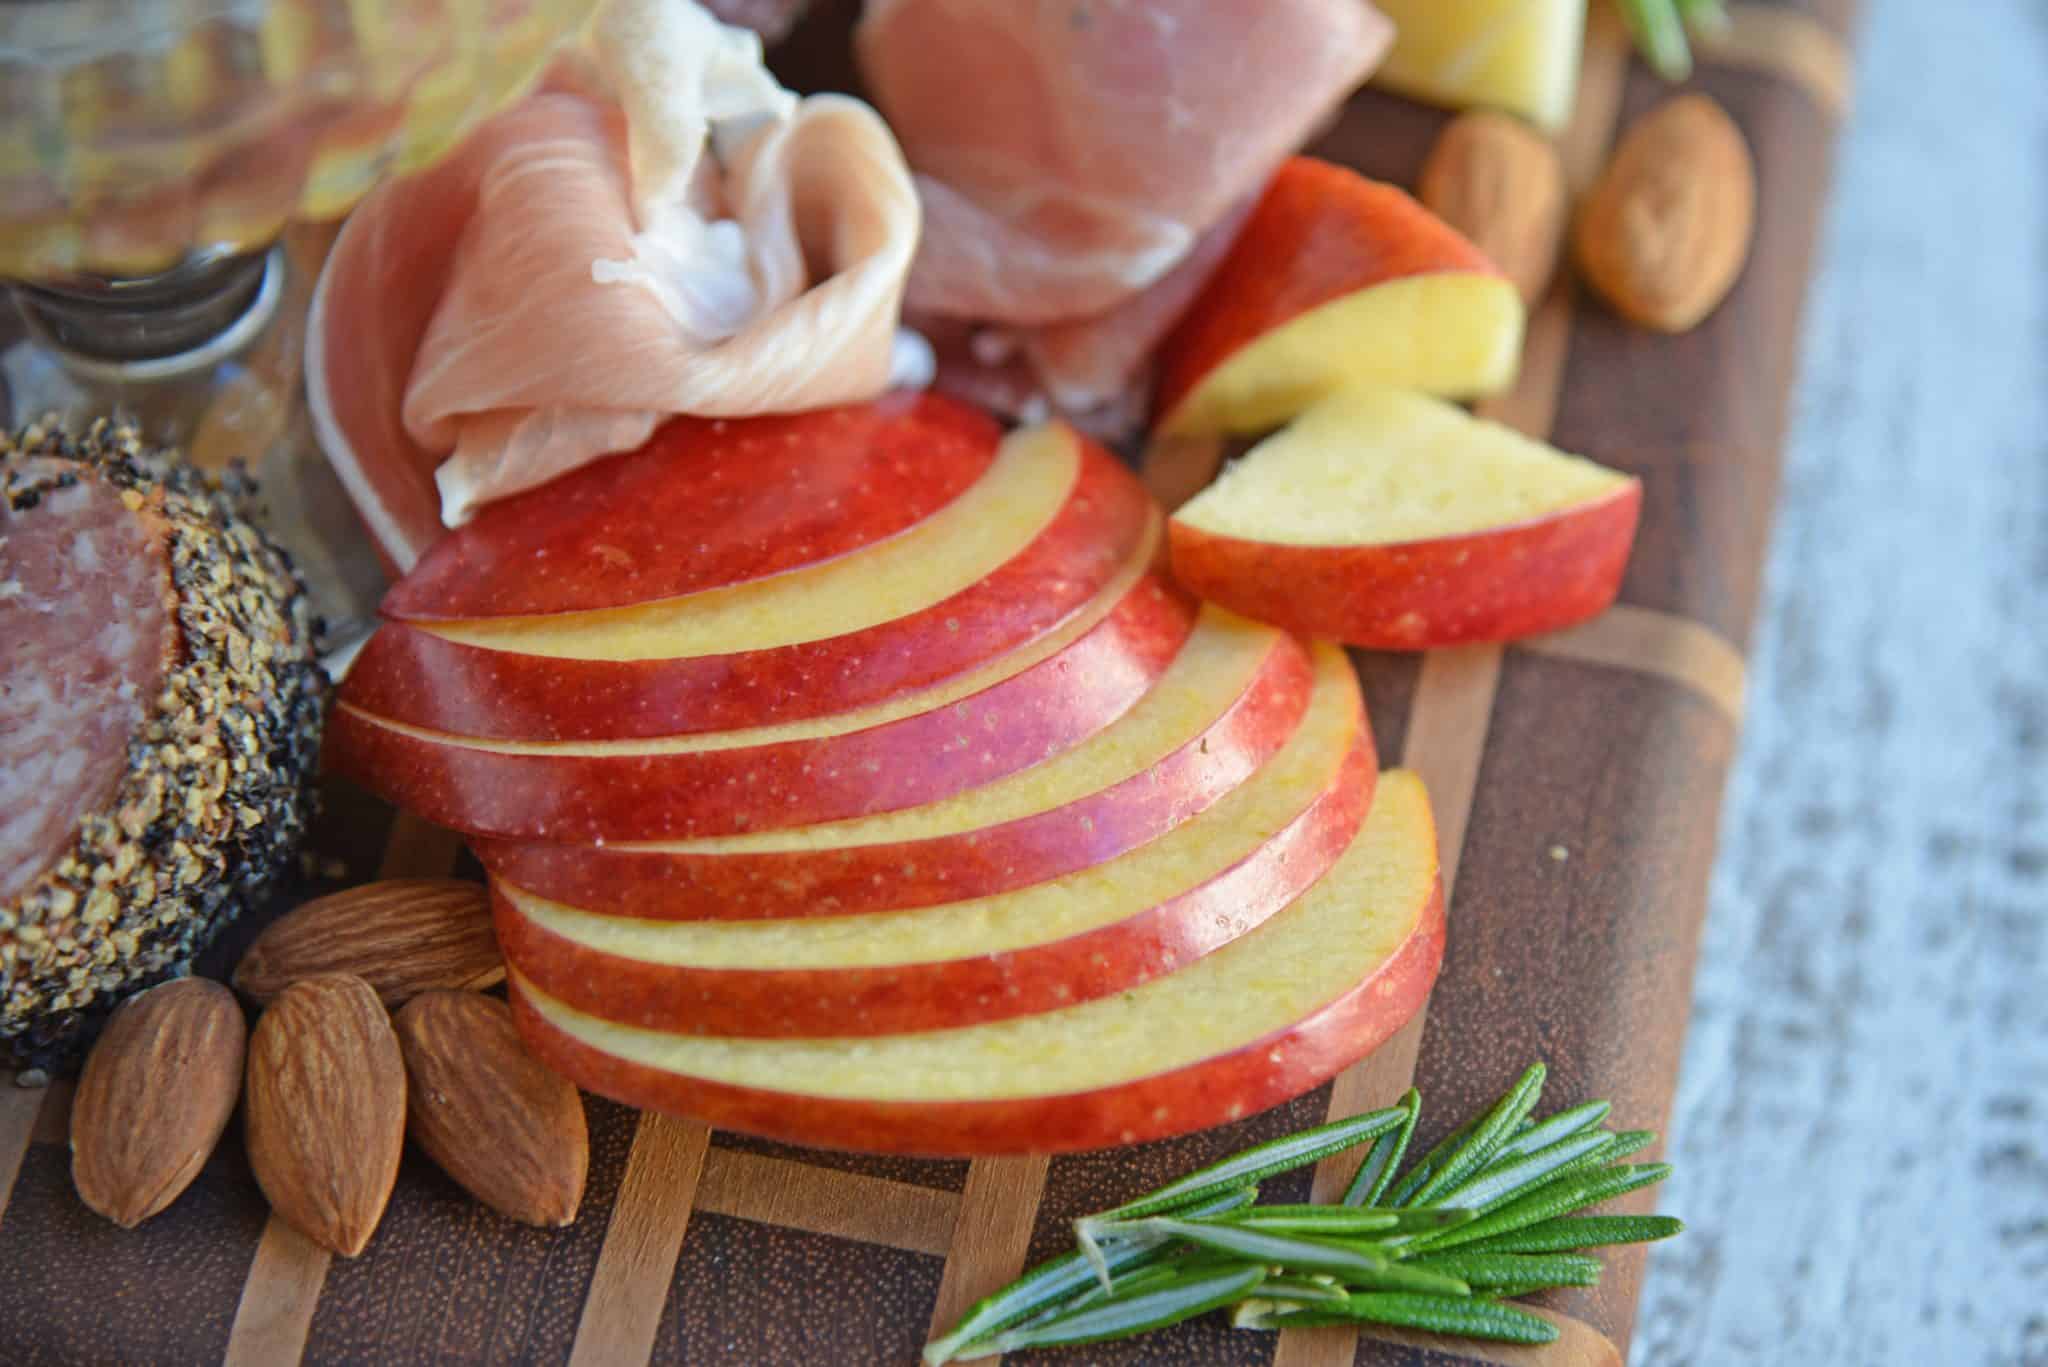 https://recipes.net/wp-content/uploads/2023/10/how-to-cut-apples-for-charcuterie-1696339188.jpg